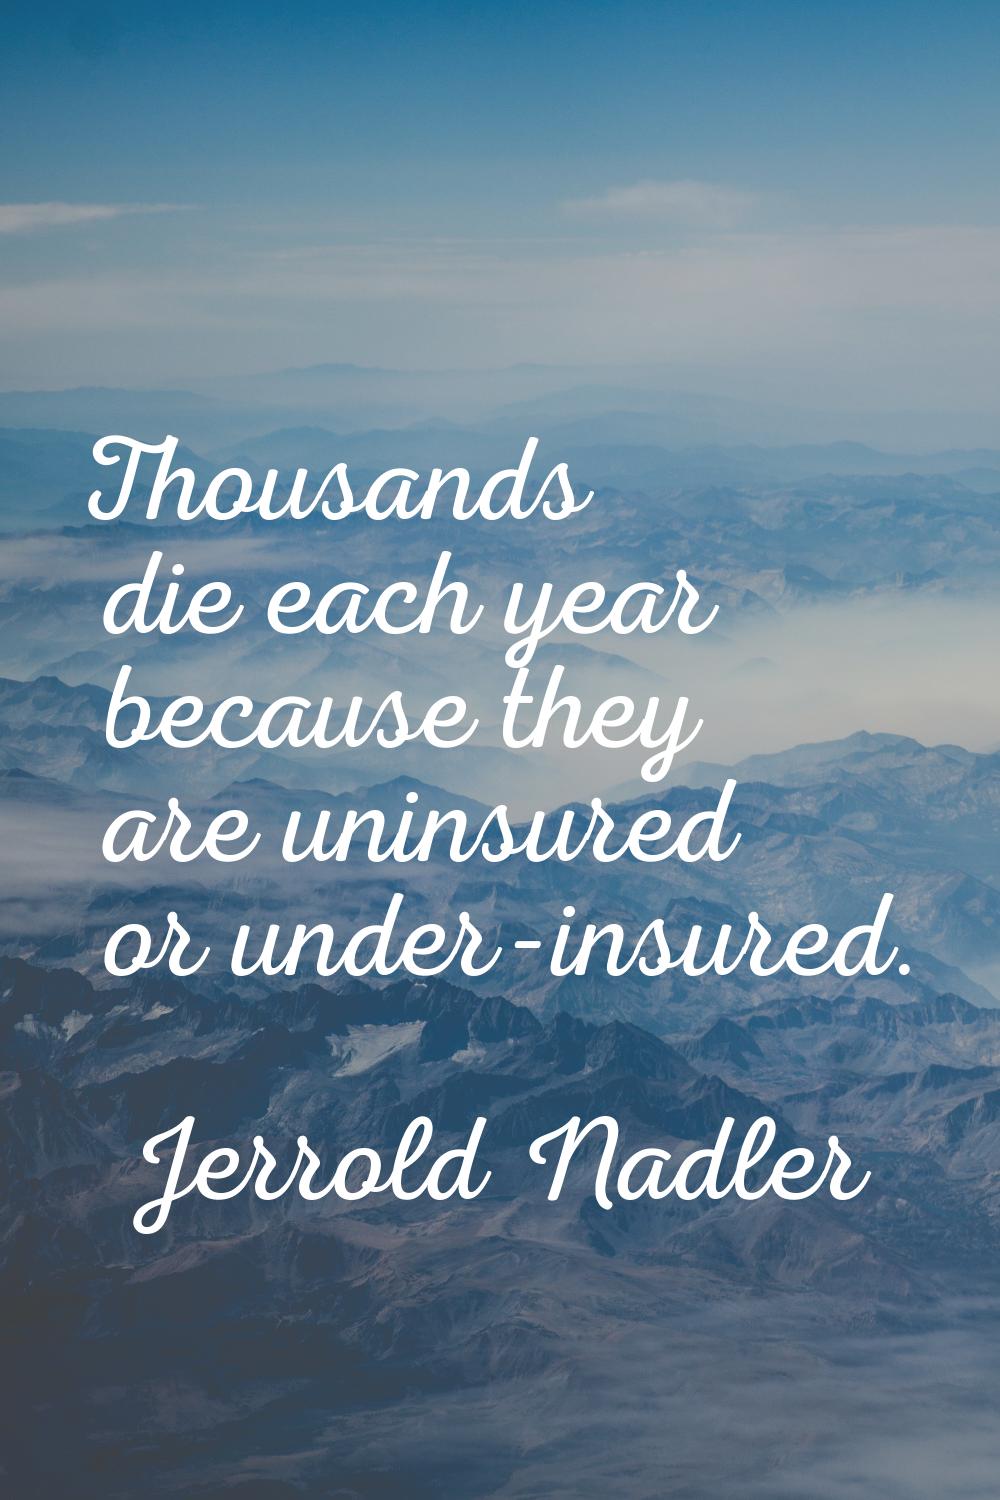 Thousands die each year because they are uninsured or under-insured.